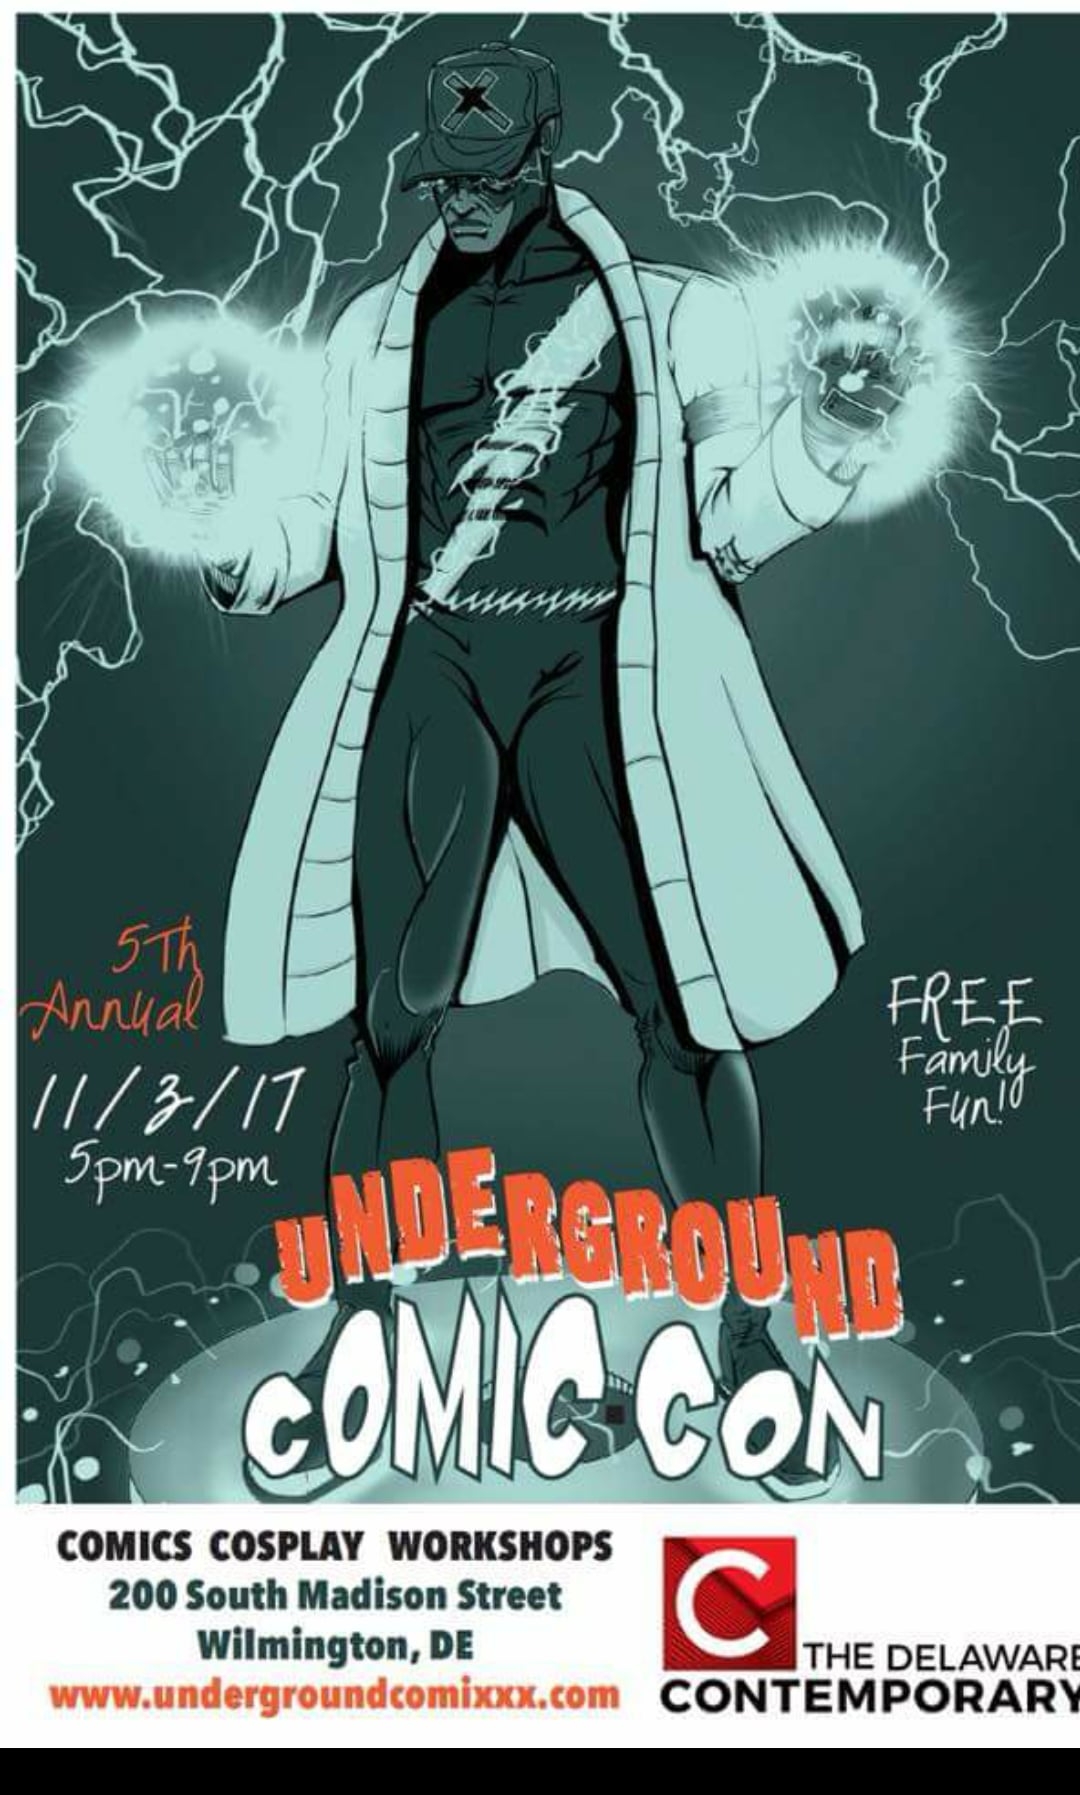 George Coleman Adamek Jr. talk about Creating Comic on Nov. 3 at the Underground Comic Con